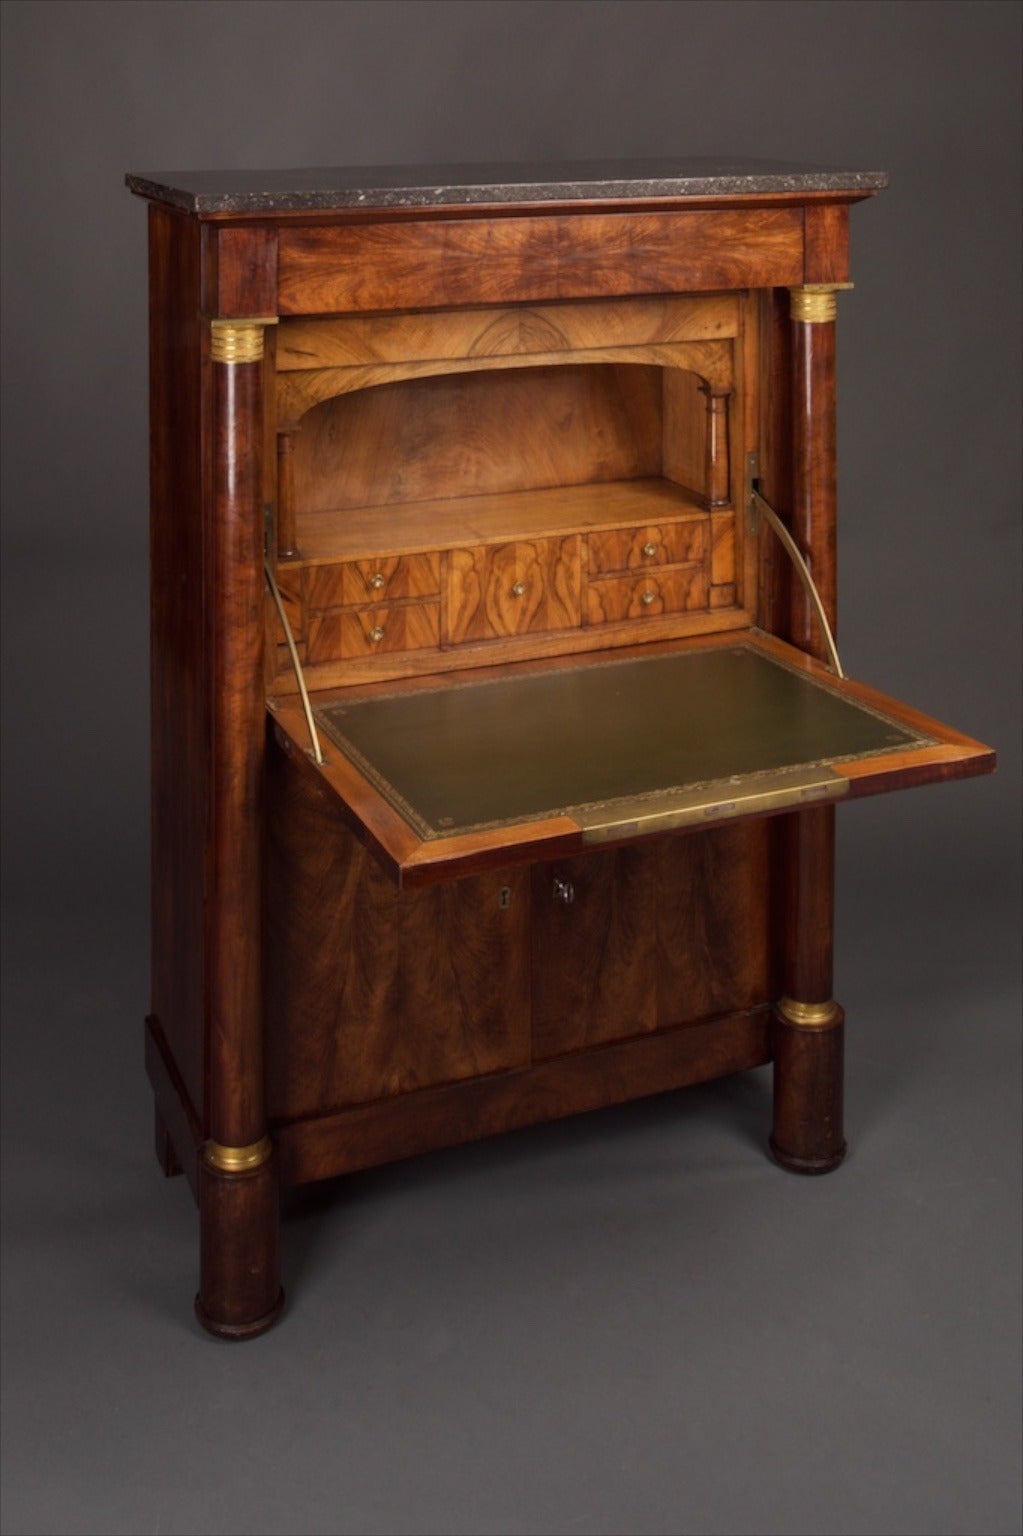 A 19th century secretaire abattant in the Empire taste. Bookmatched feathered mahogany, the interior of the desk being in pale bookmatched figured walnut. Gilt bronze mounts and grey marble top. Frieze drawer with the secretaire below, with a